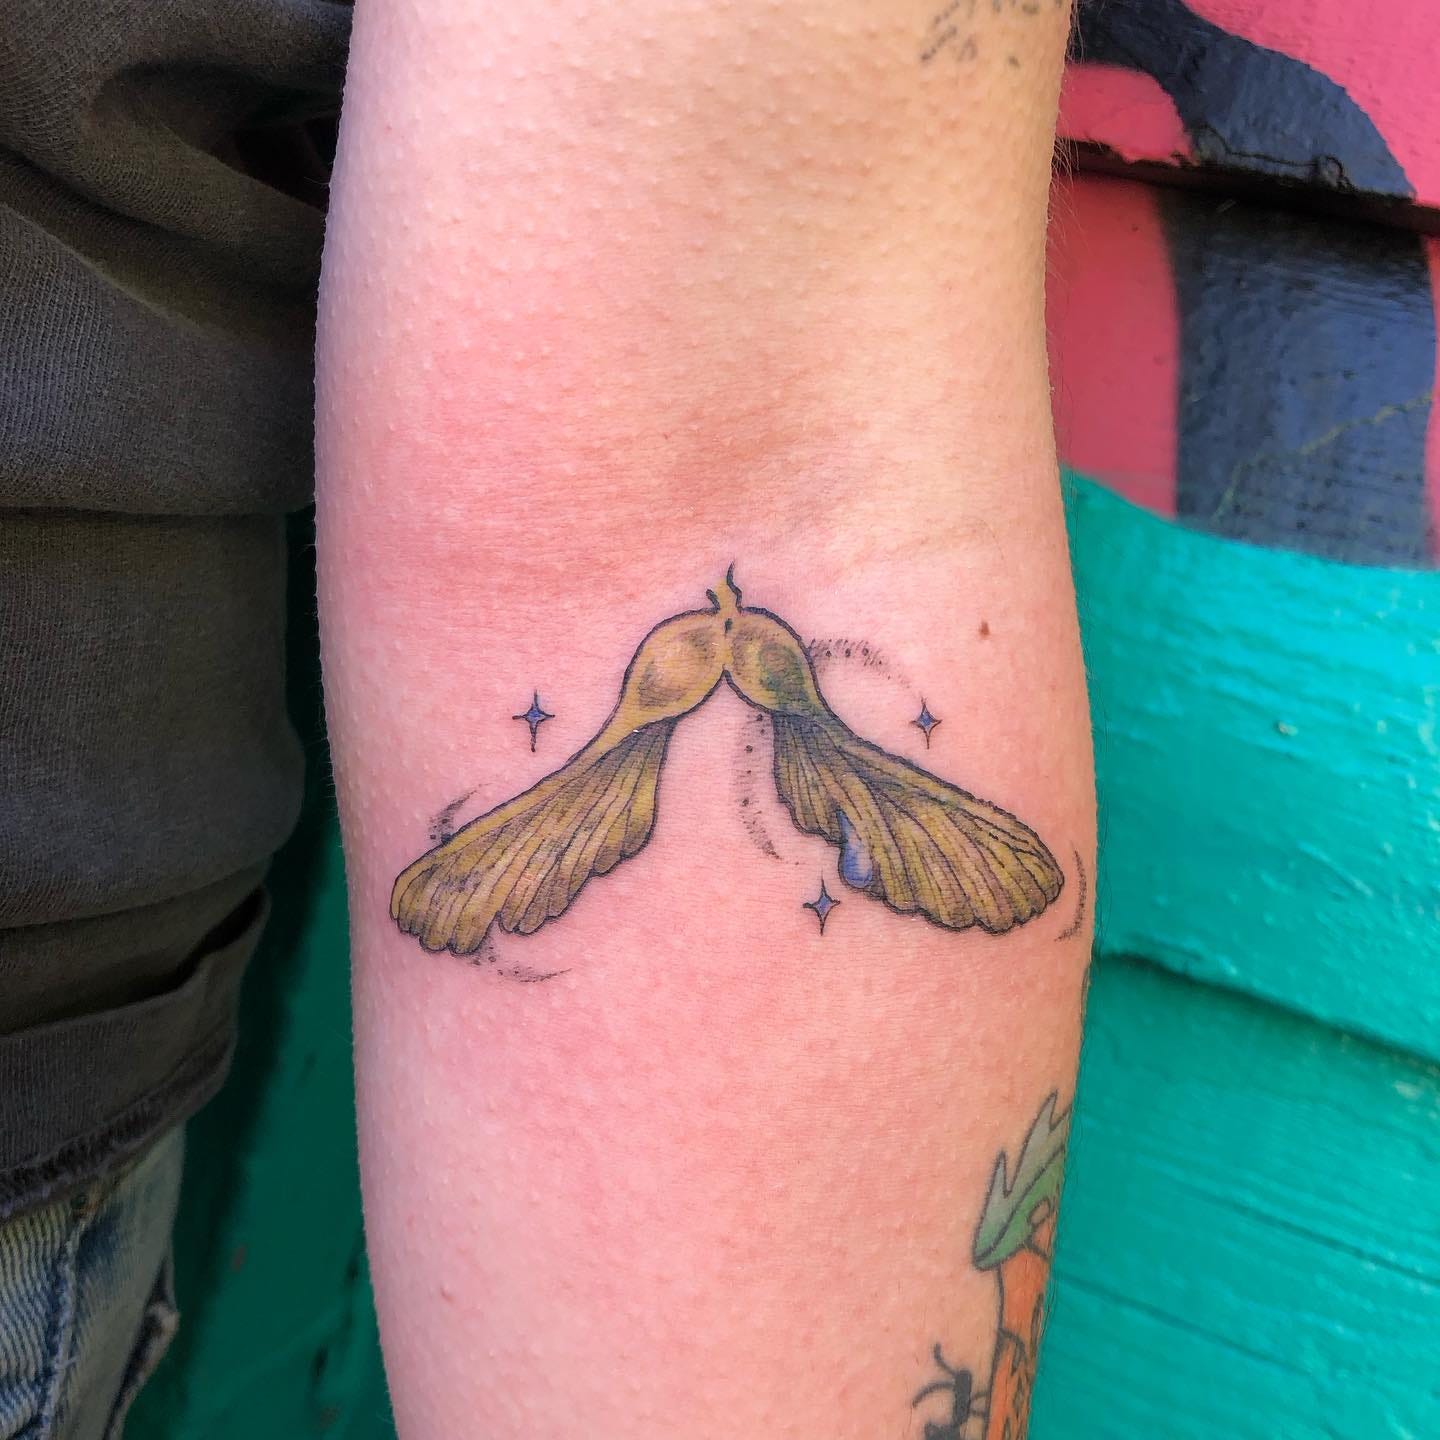 a tattoo on madelines arm of a little seed copter right up near the ditch of their arm they have a light warm skin tone and the tattoo is lined in black and coloured in avocado green with blue accents